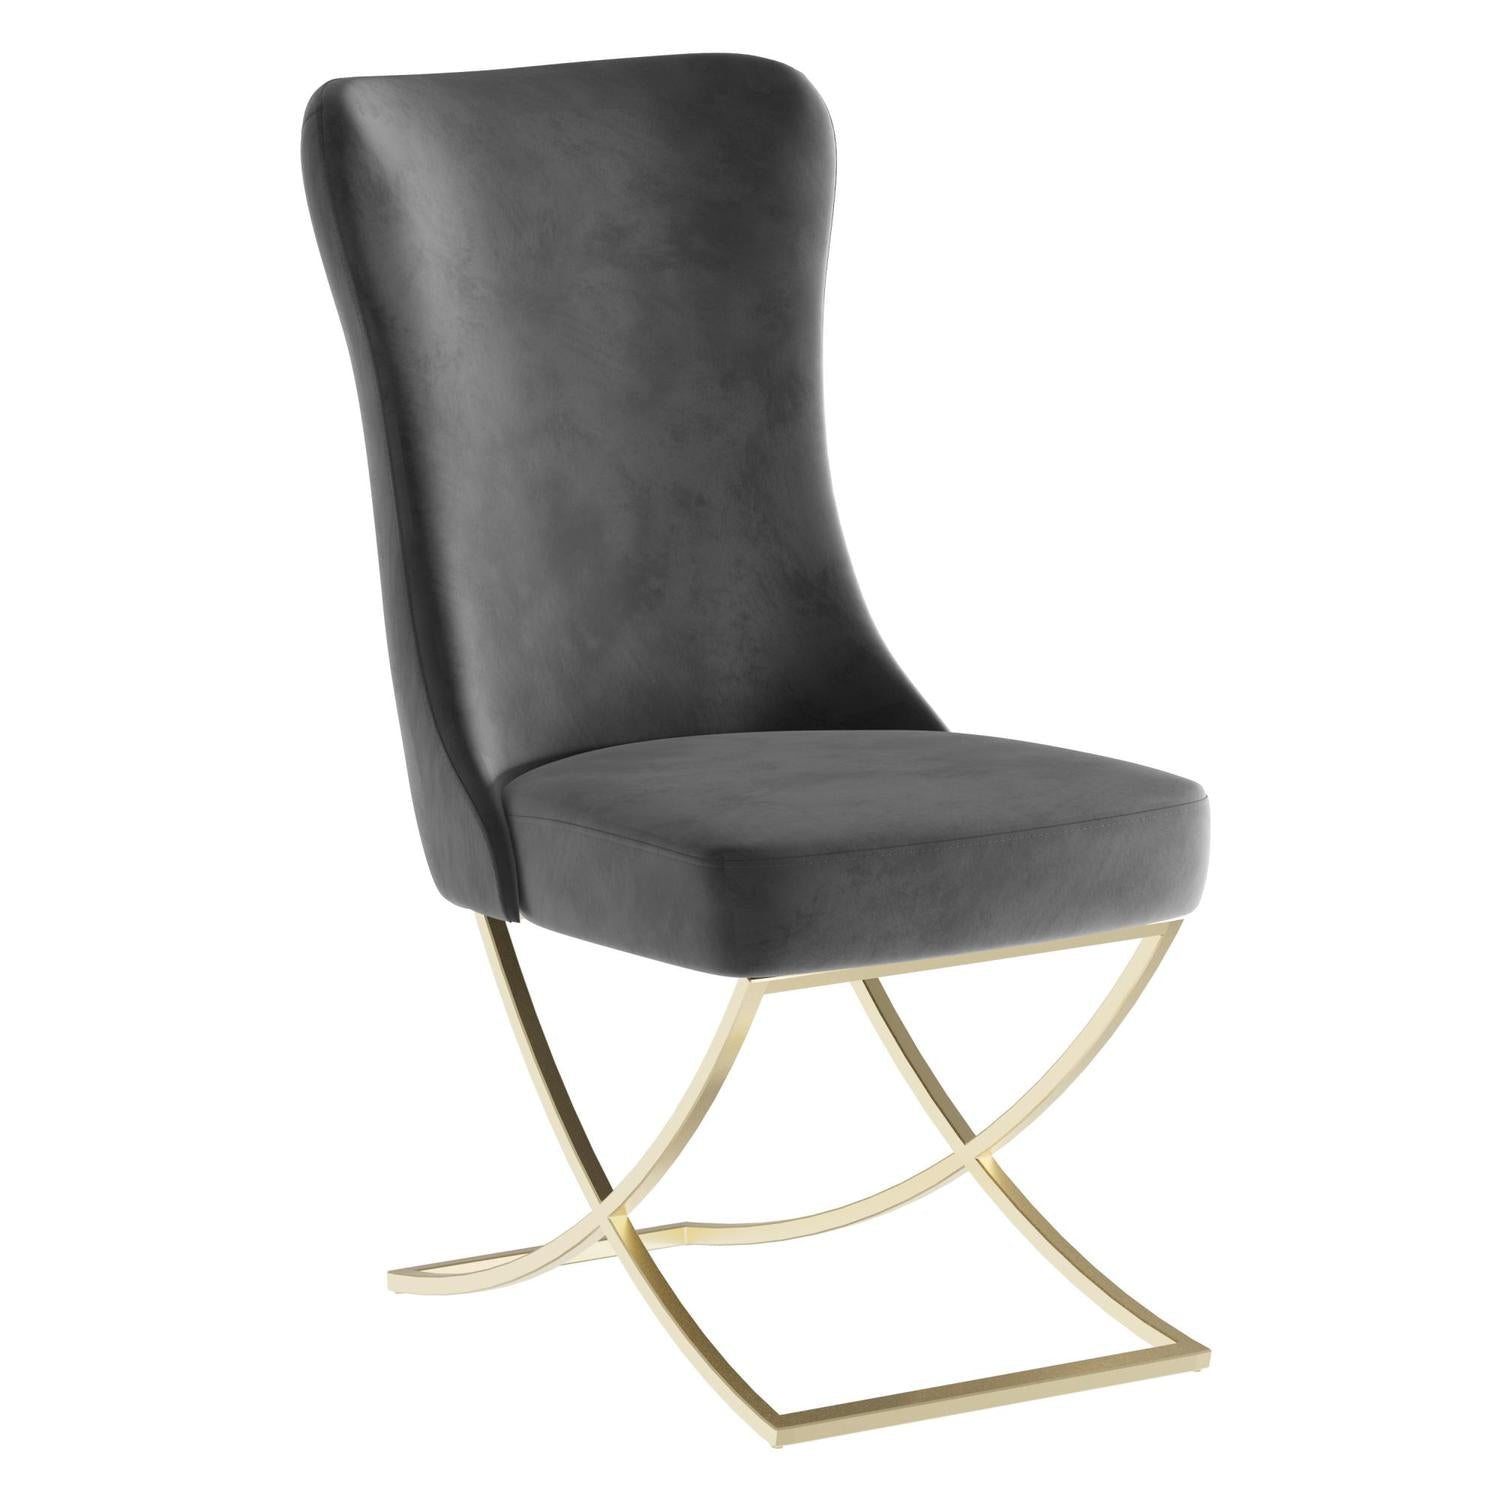 Sultan Collection Wing Back, Modern design, upholstered dining chair in Charcoal Gray with Gold Metal legs in white background the front view.